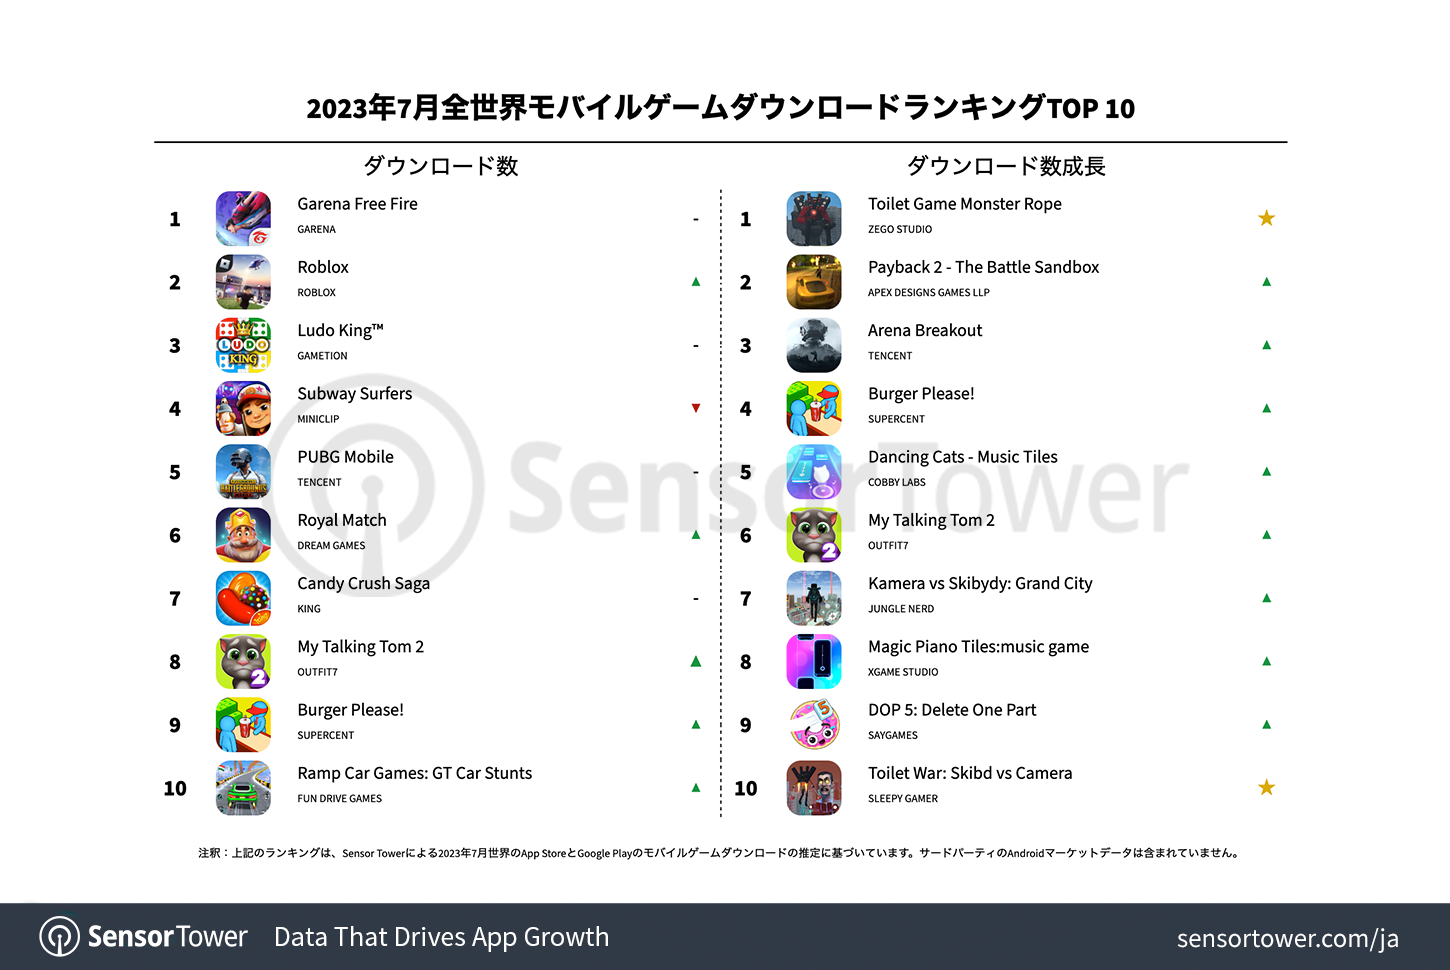 -JP--Top-Mobile-Games-Worldwide-for-July-2023-by-Downloads